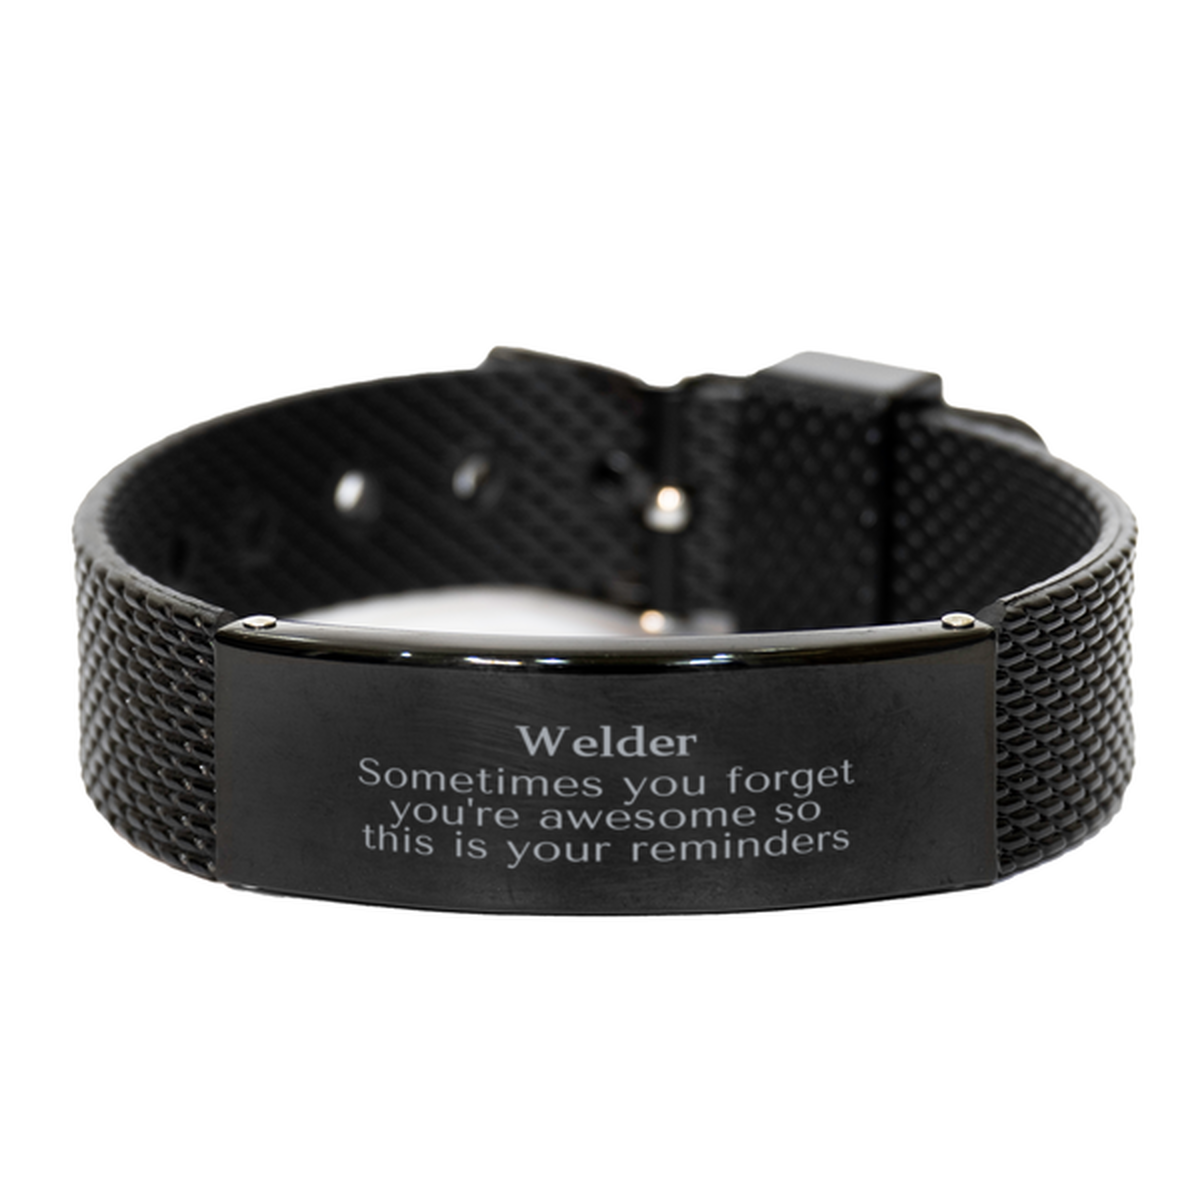 Sentimental Welder Black Shark Mesh Bracelet, Welder Sometimes you forget you're awesome so this is your reminders, Graduation Christmas Birthday Gifts for Welder, Men, Women, Coworkers